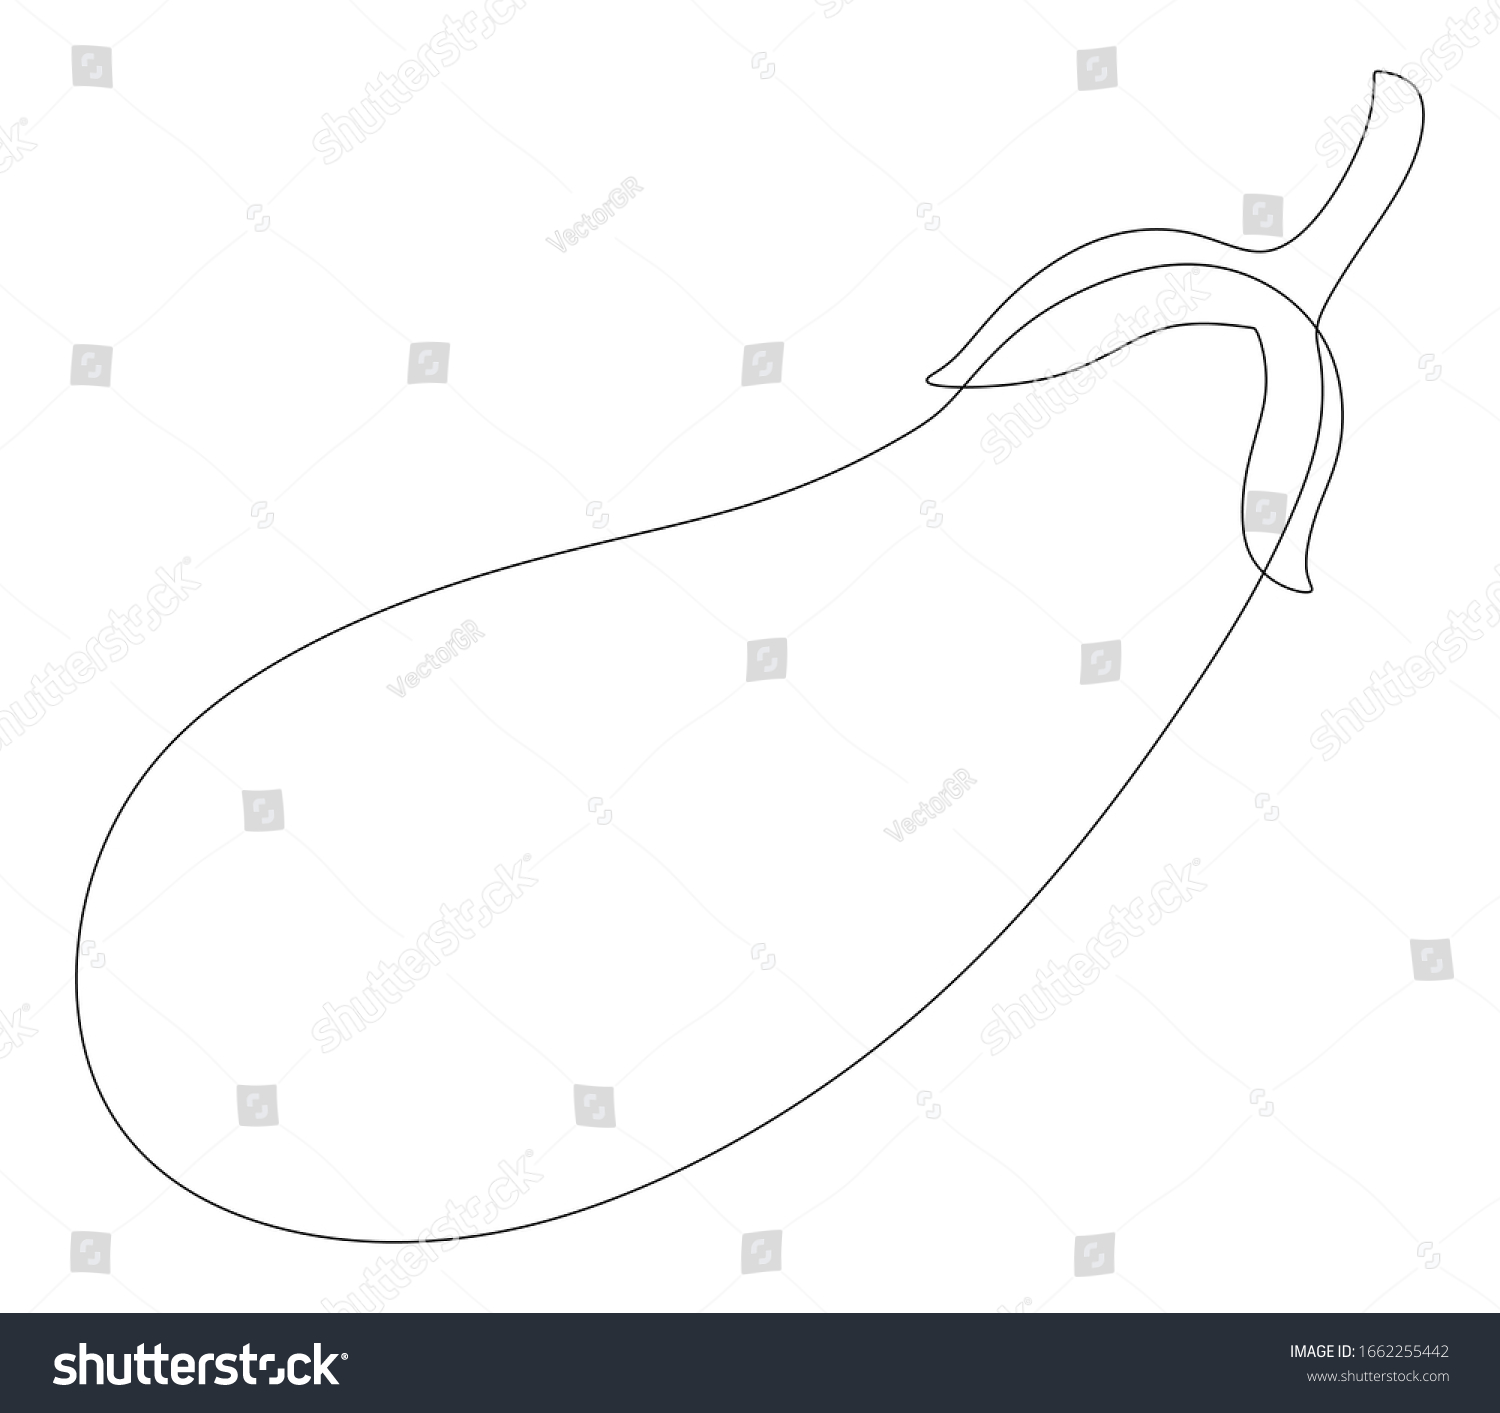 Eggplant in one continuous line. Vector illustration. #1662255442